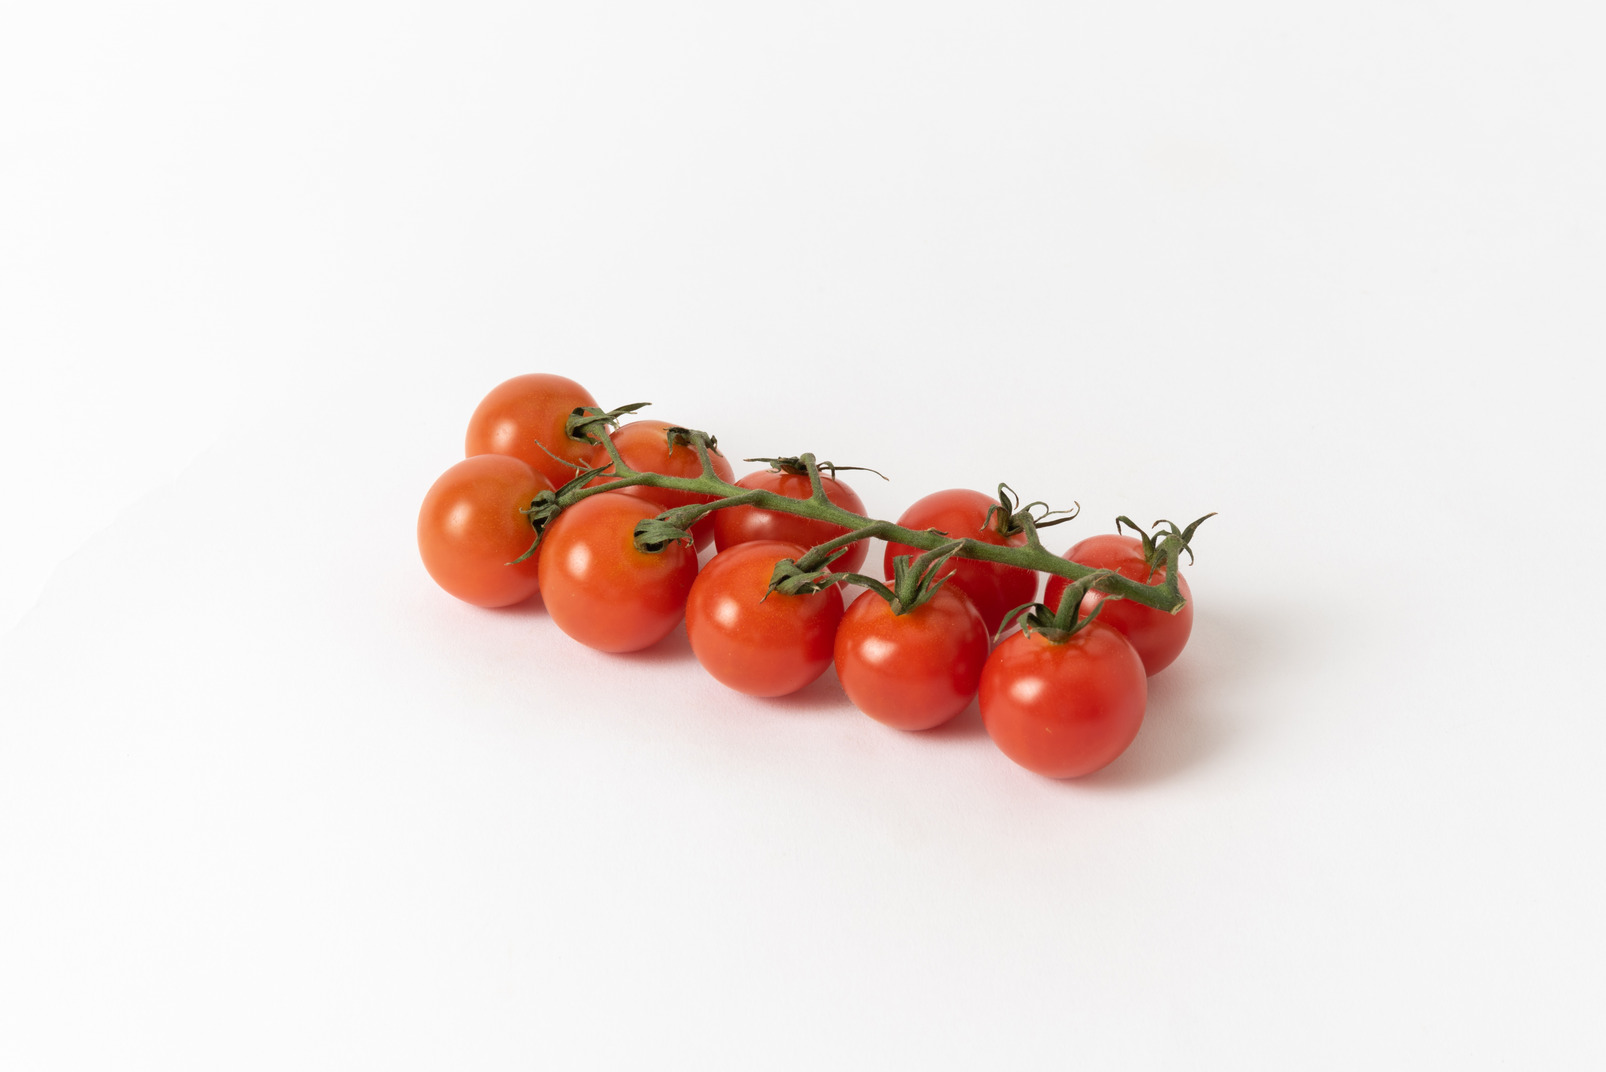 A branch of cherry tomatoes